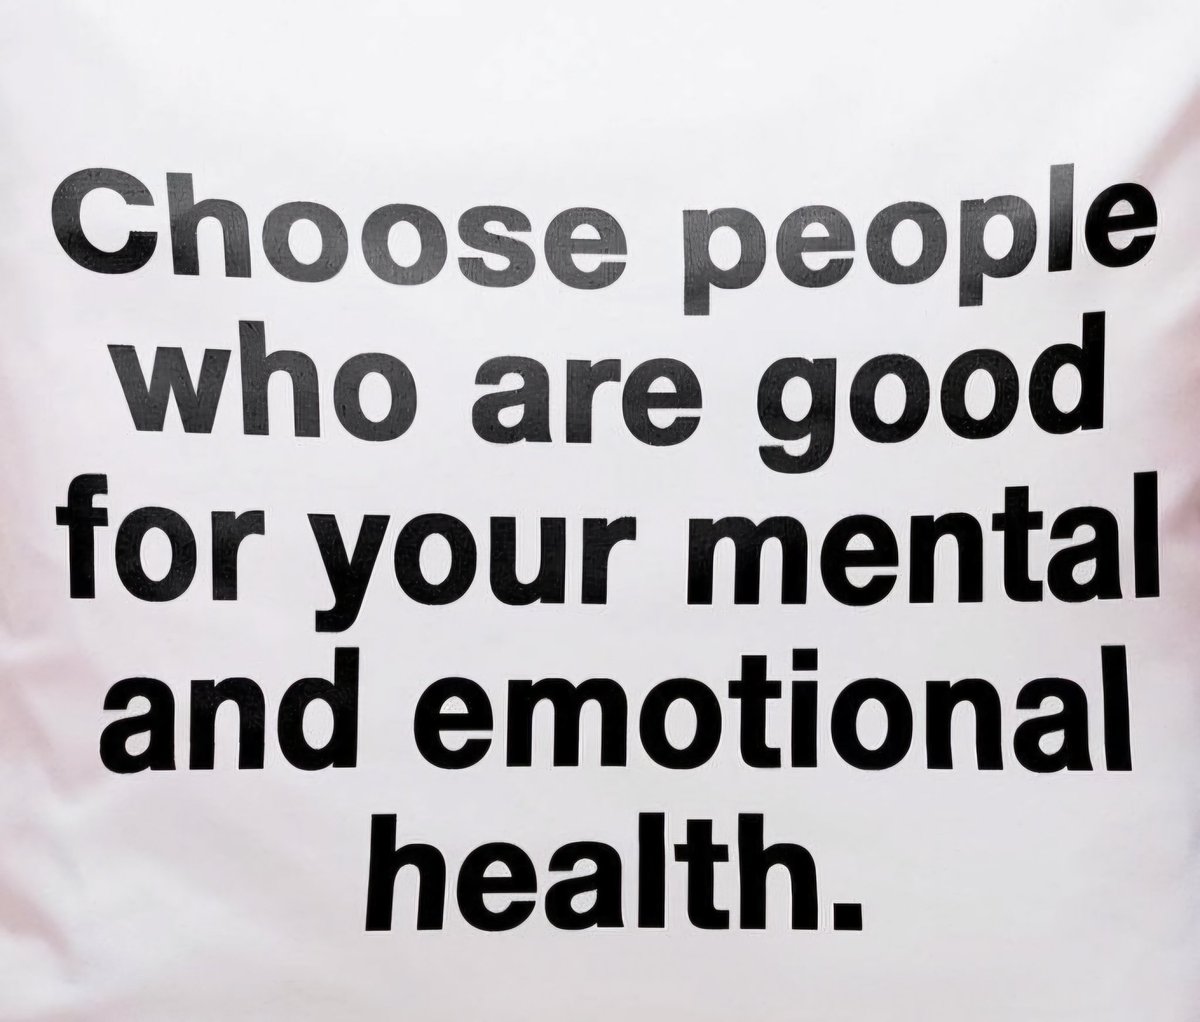 #mentalhealth #emotionalhealth #relationships #selfcare

It's important to surround yourself with people who are good for your mental and emotional health. This means people who are supportive, positive, and who make you feel good about yourself.

It can be difficult to let go of…